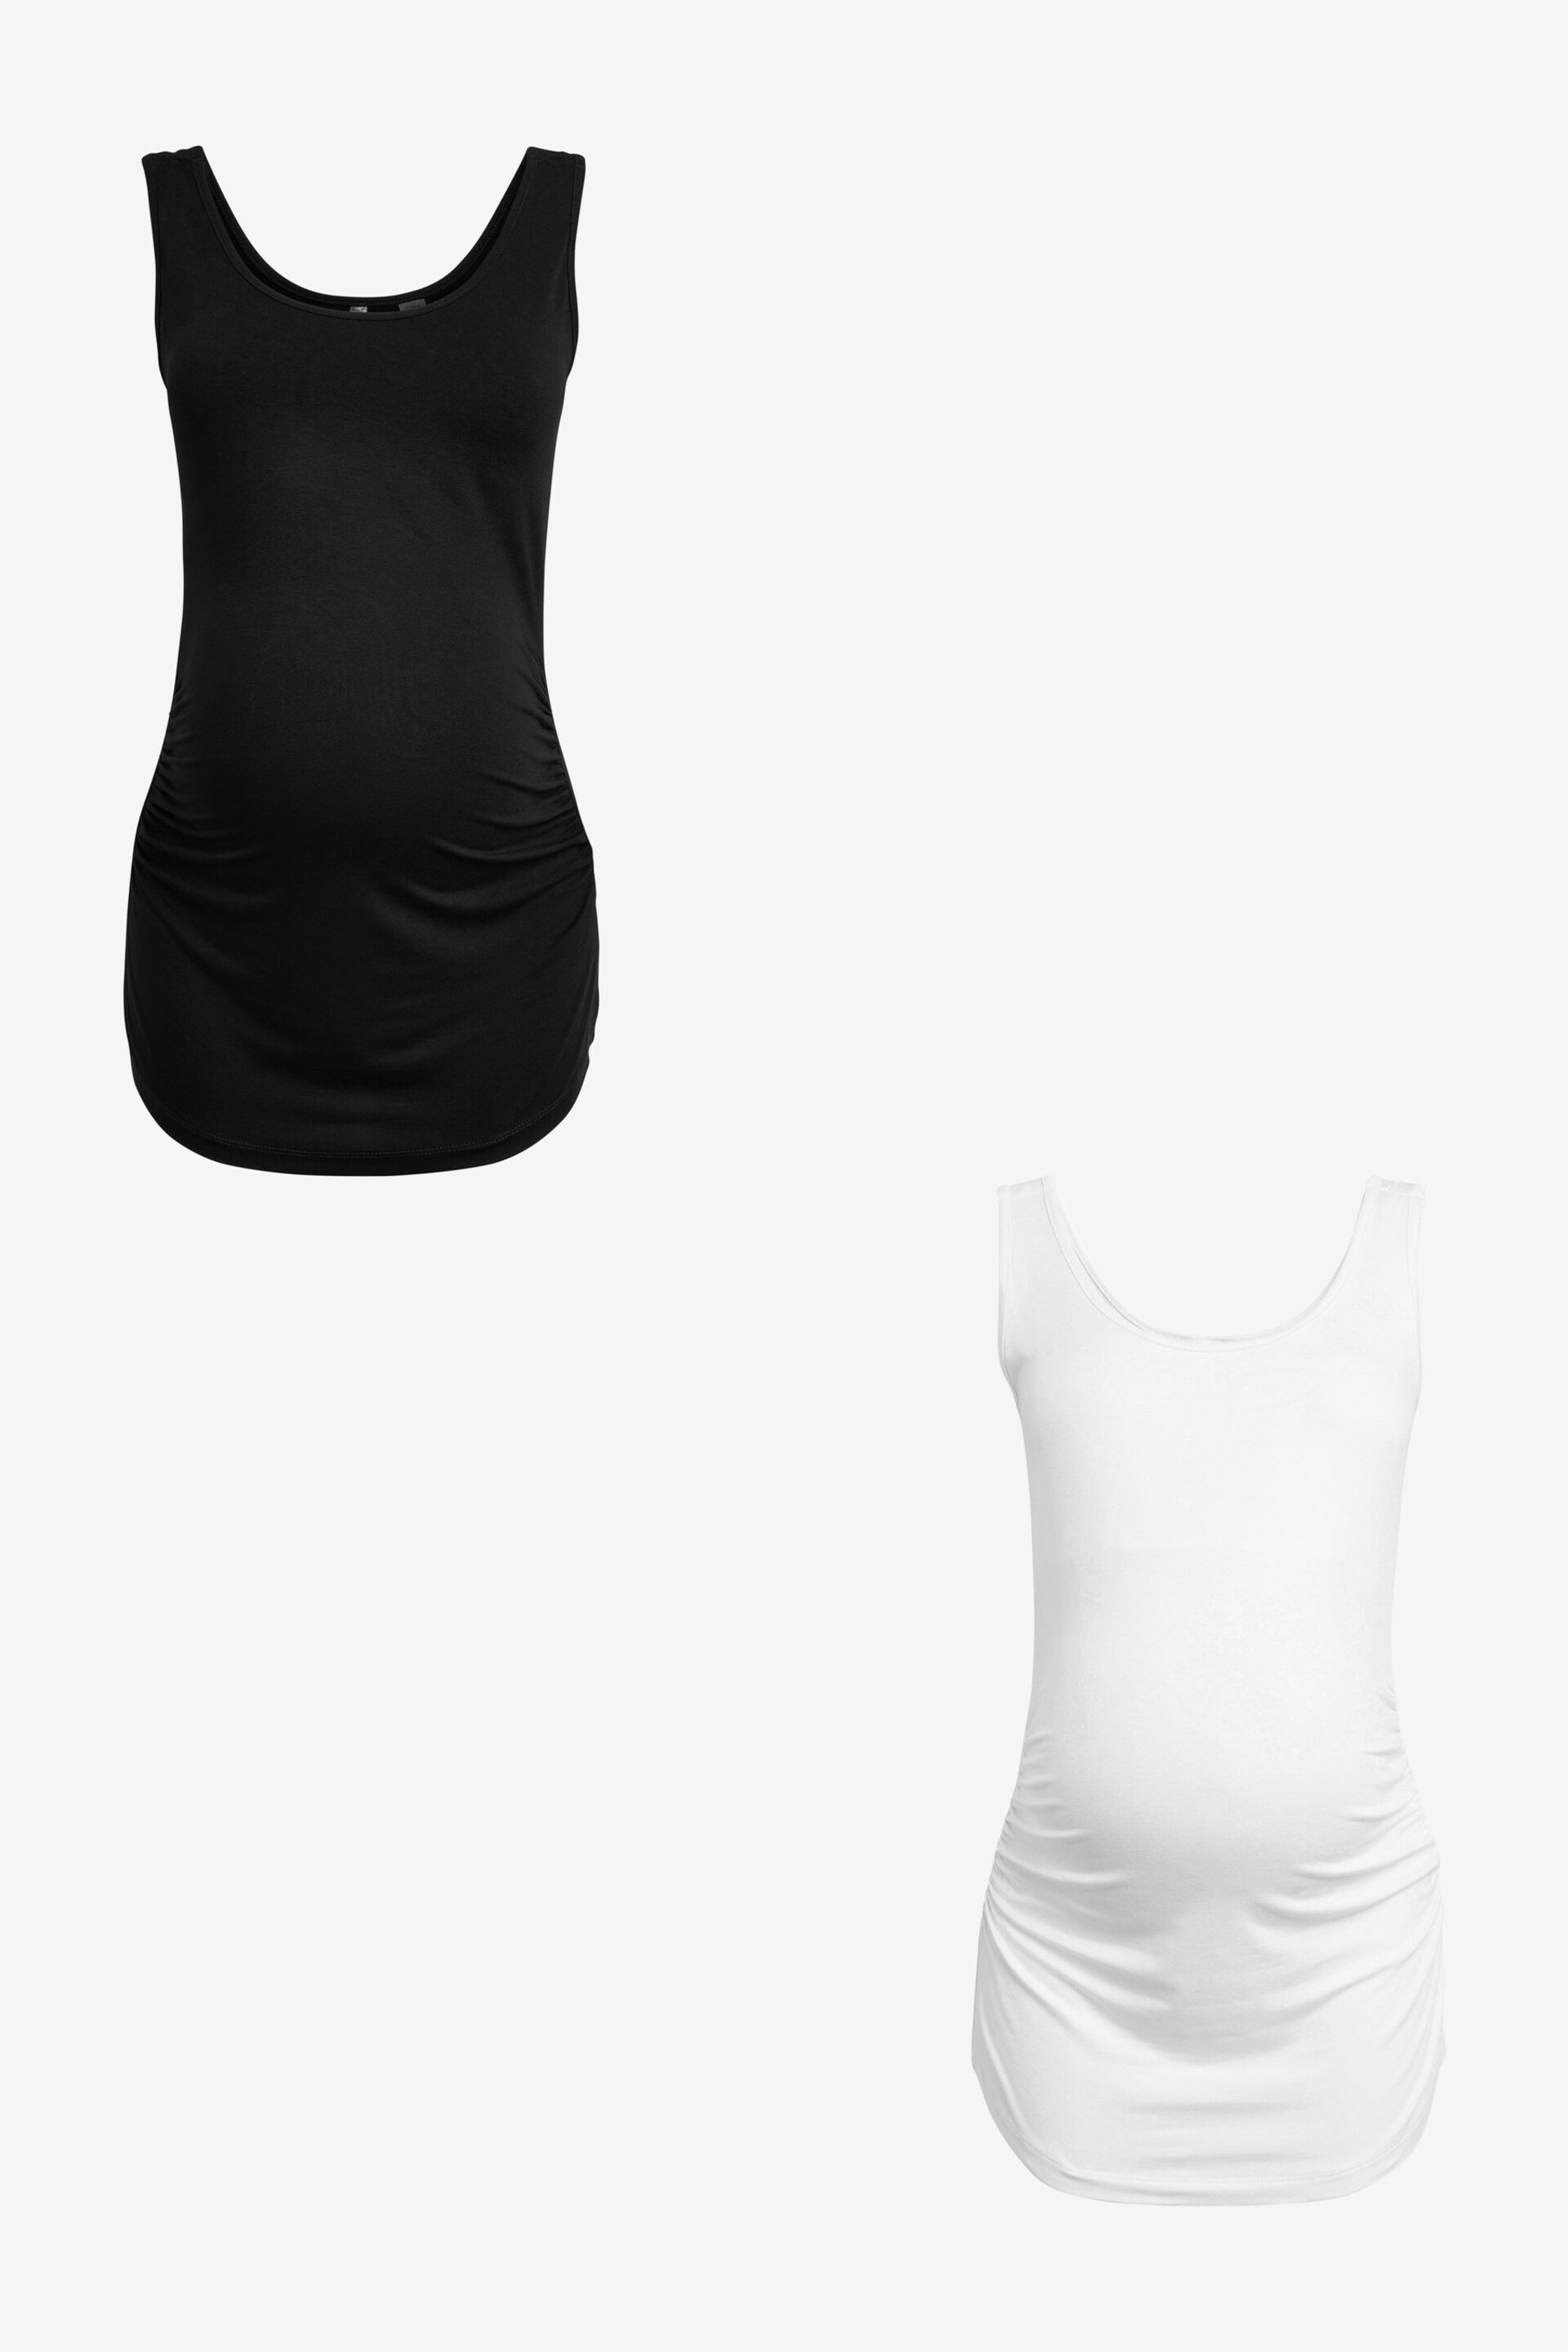 Seraphine Black Maternity & Nursing Tops - Twin Pack - Image 1 of 10